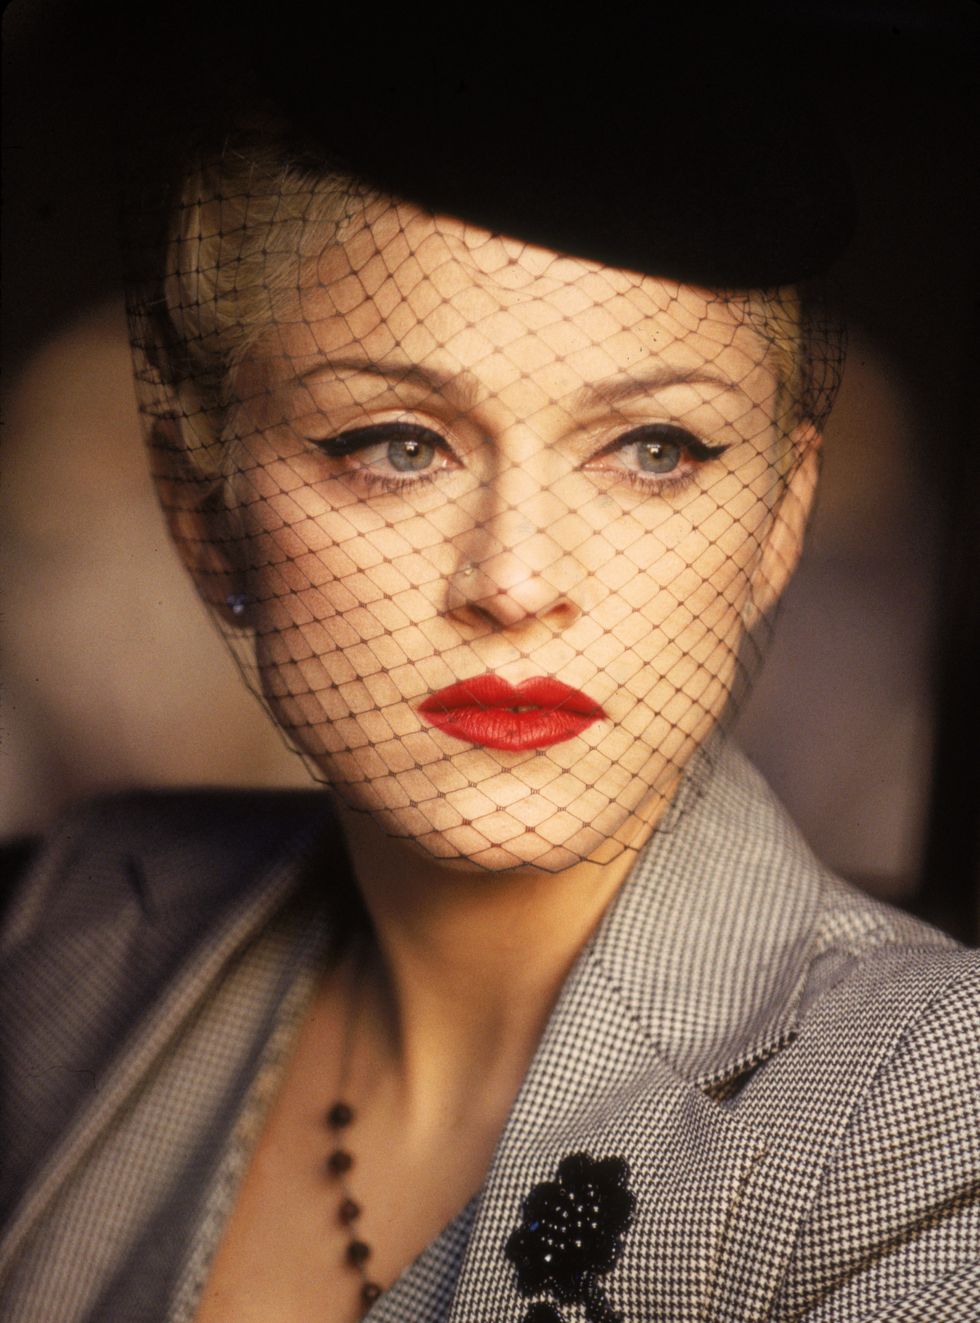 madonna during 'take a bow' video shoot